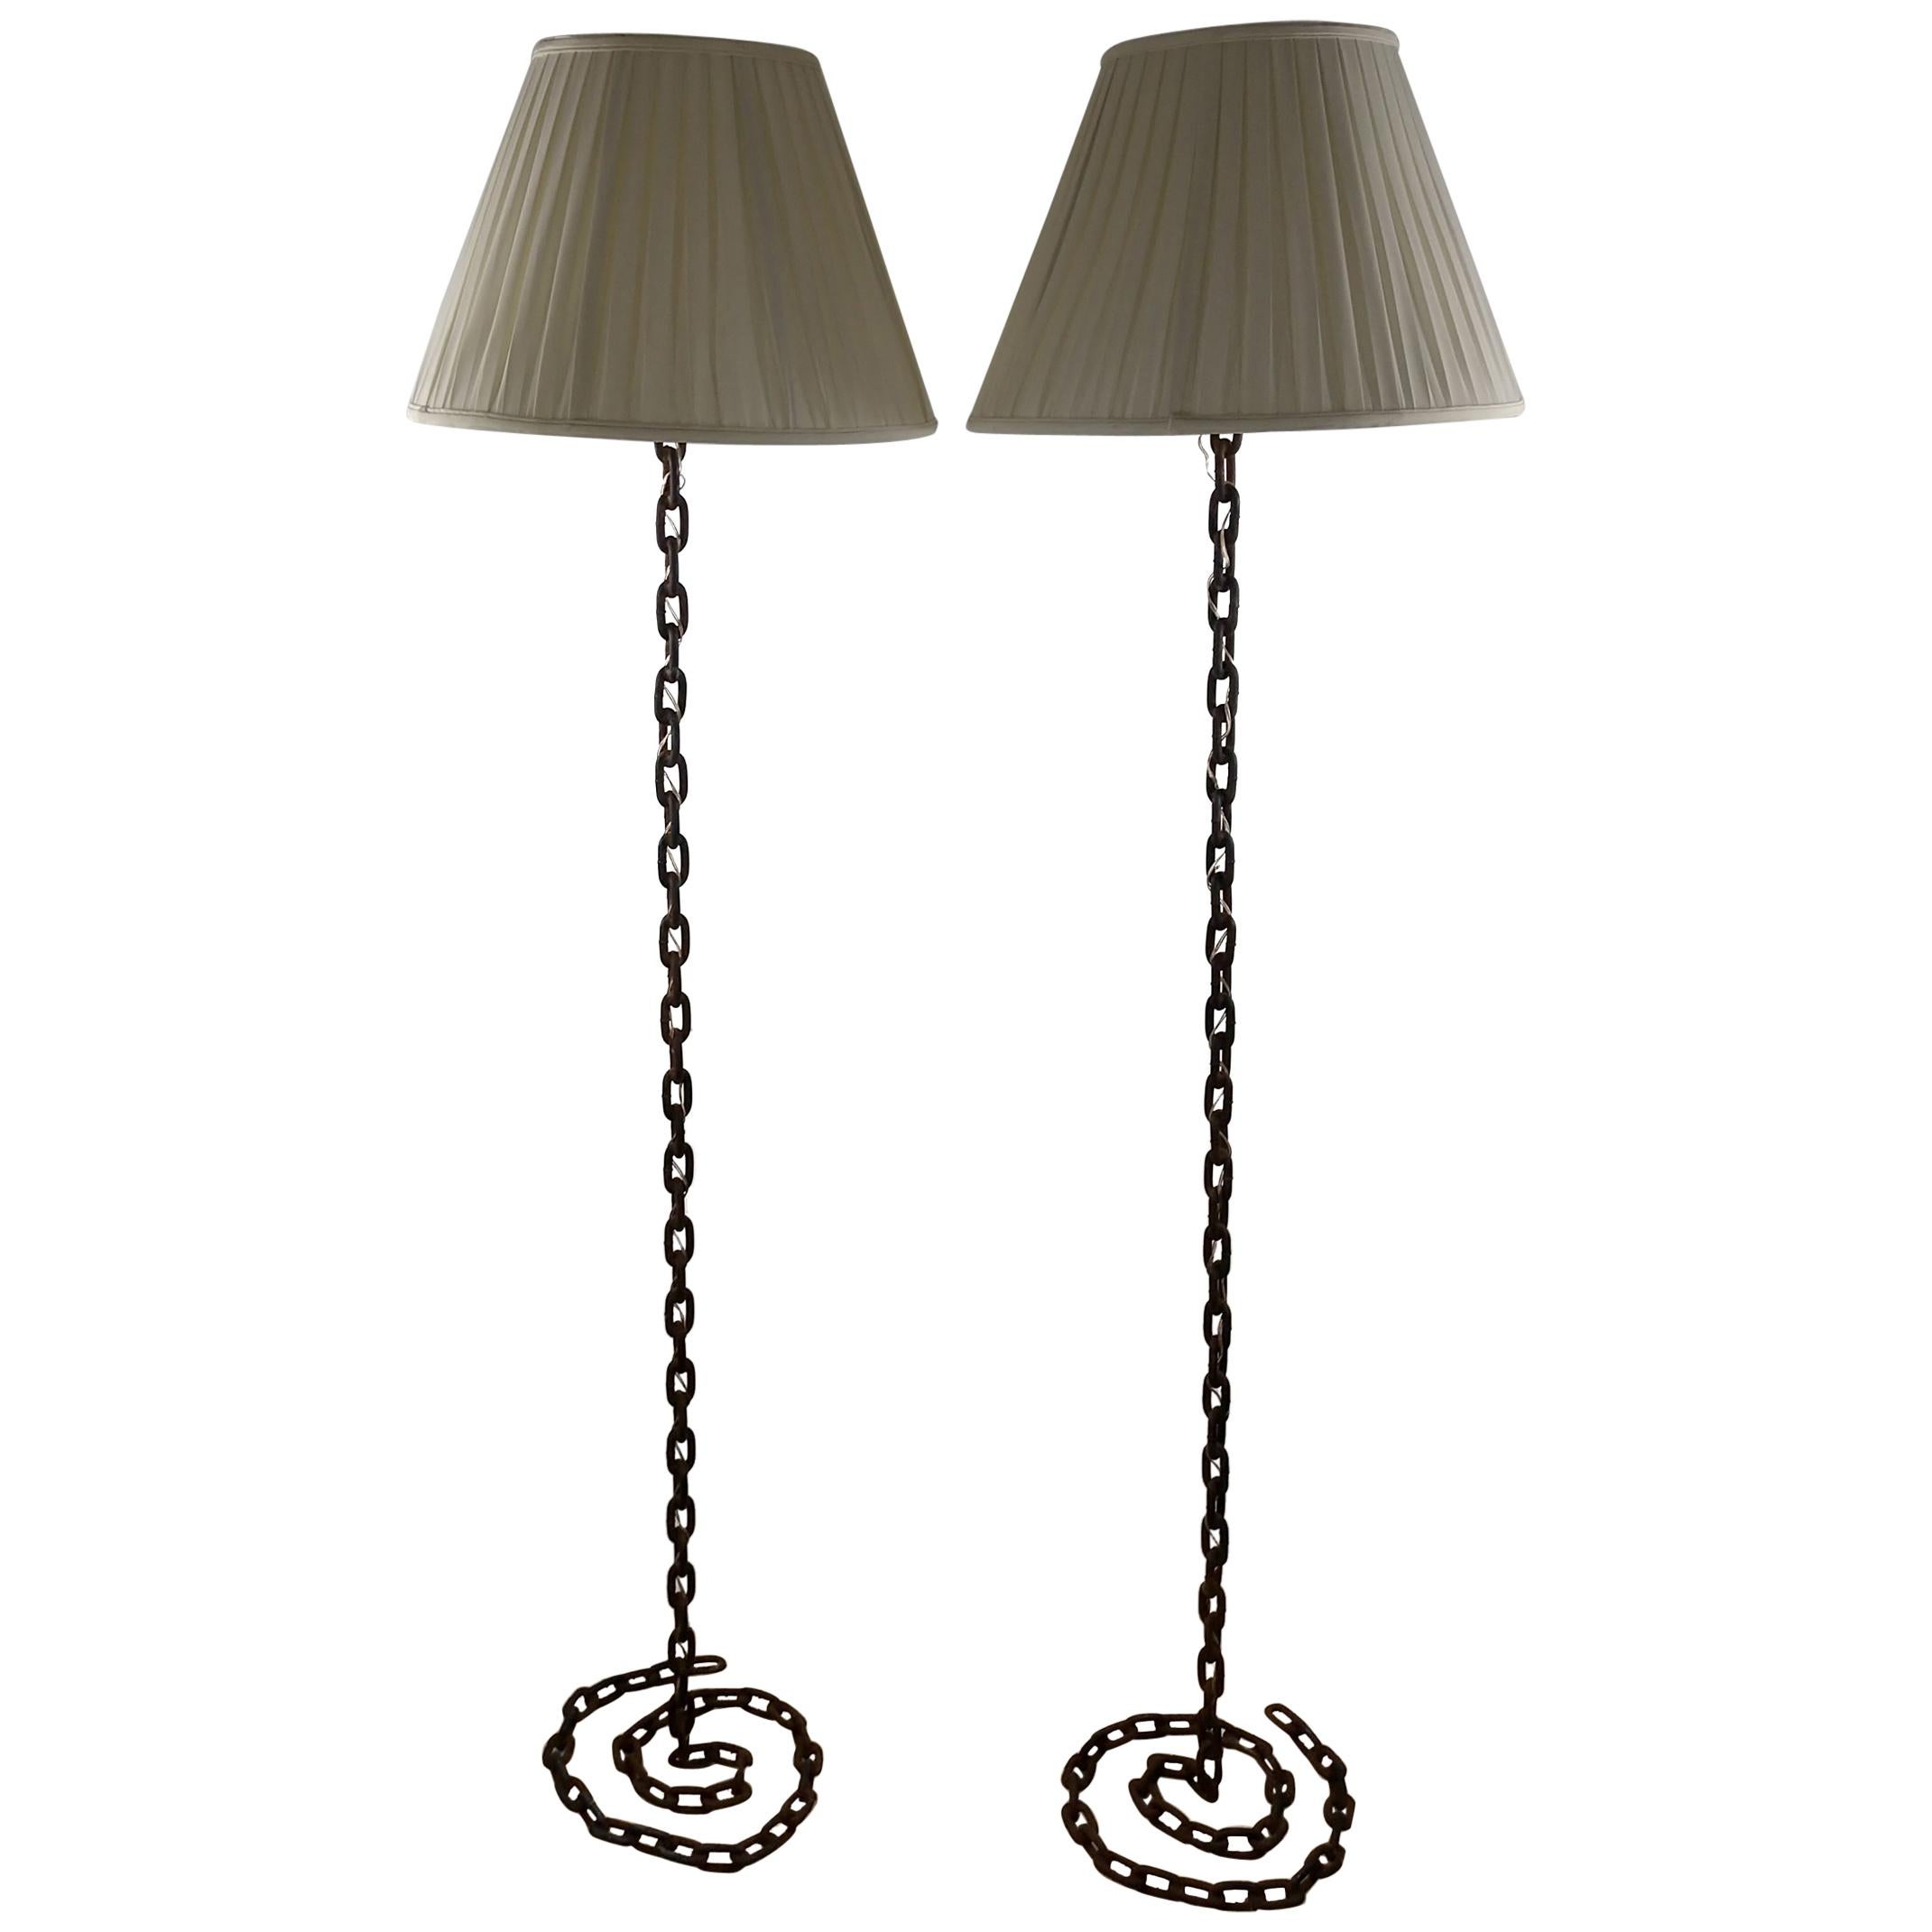 Pair of Brutalist French Iron Chain Rope Floor Lamps Midcentury